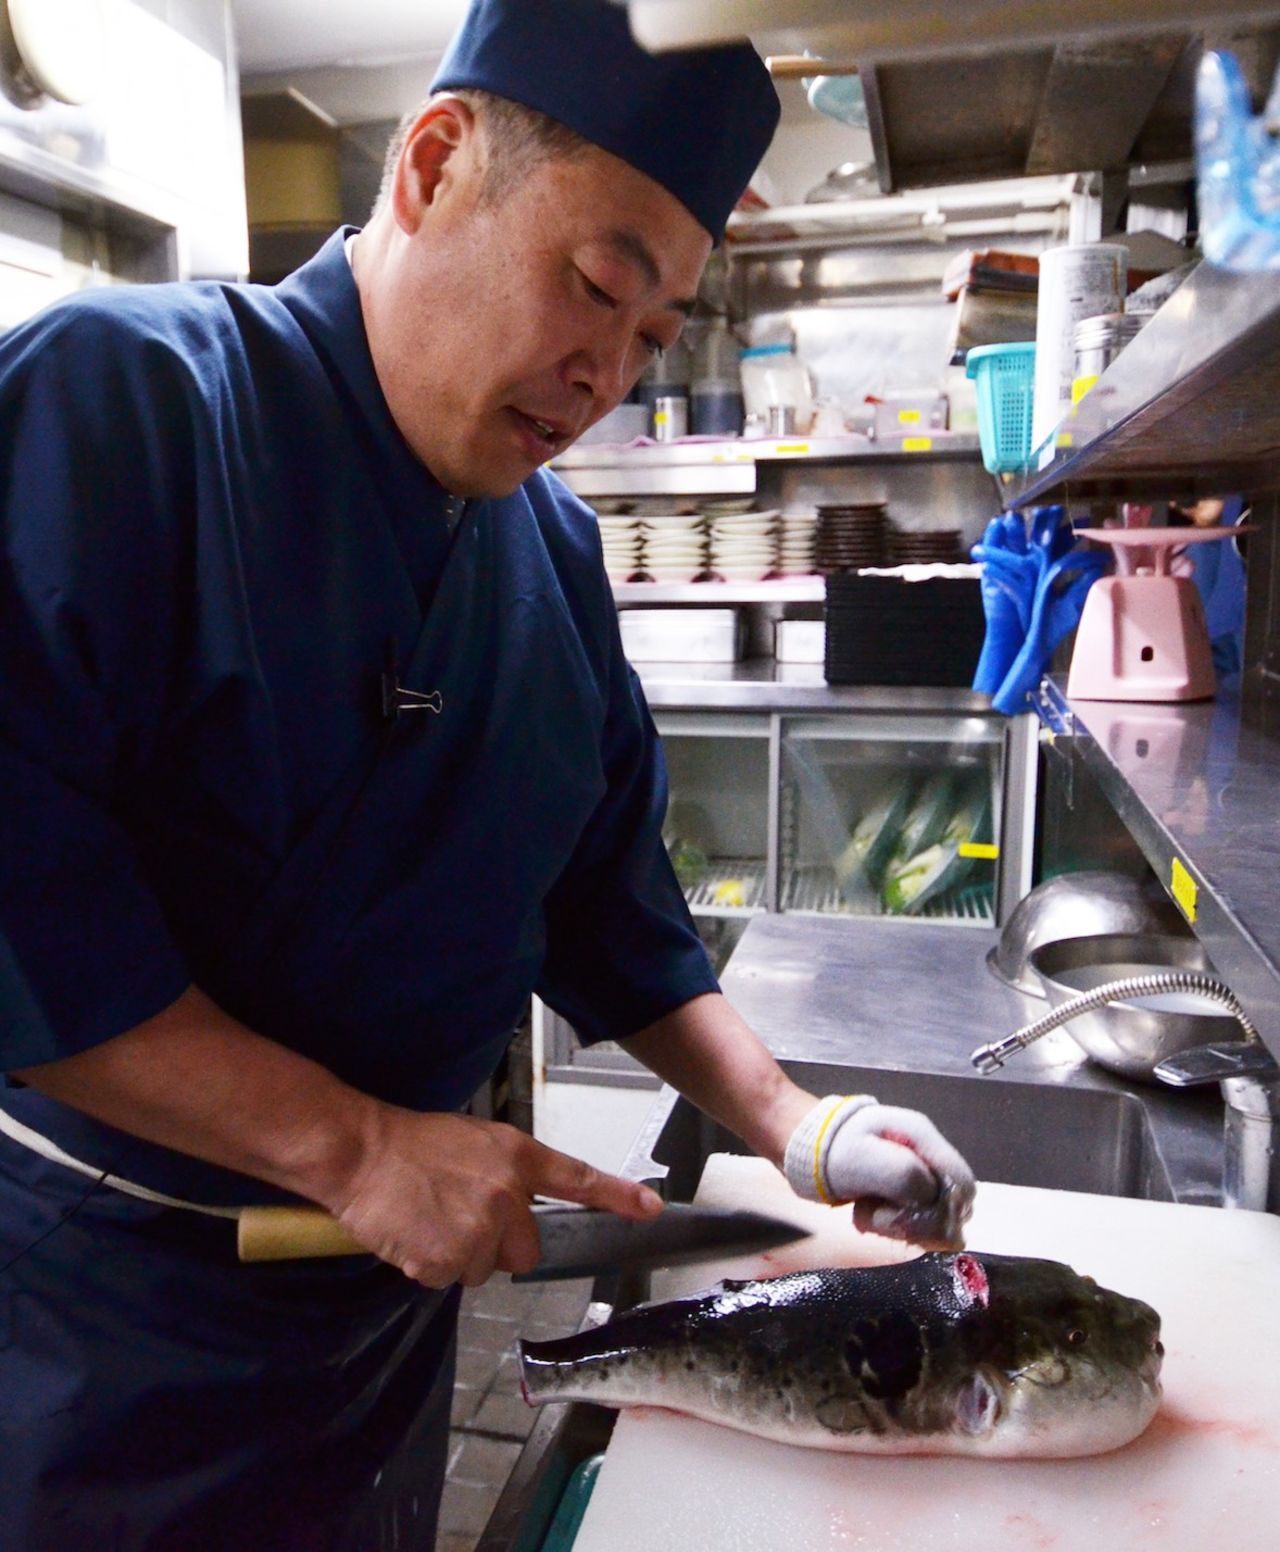 Chef Shigekazu Suzuki slices a puffer fish, known as fugu in Japan, to remove toxic internal organs at his Tokyo restaurant Torafugu-tei. Often served in sashimi form, fugu is famed for its subtle but flavorful taste.